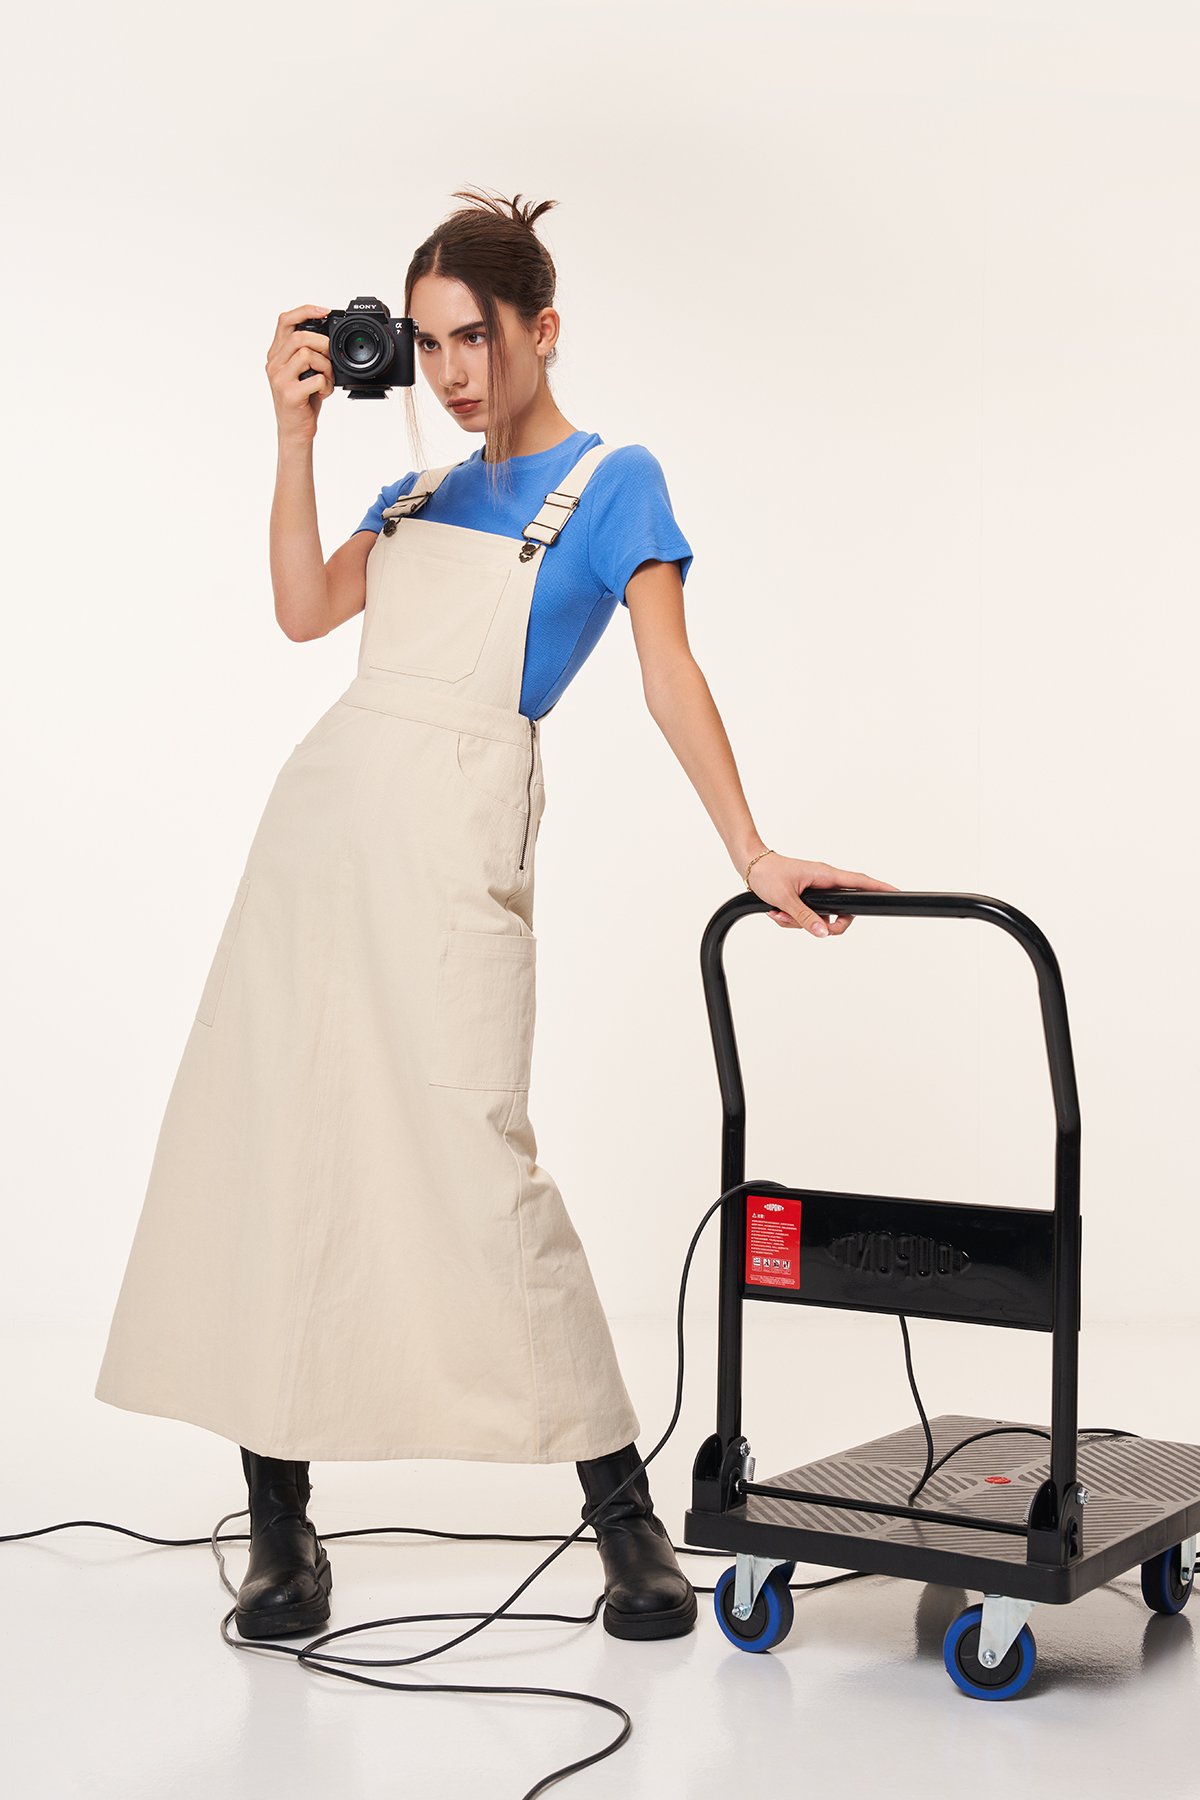 https://dum76bmz7do3s.cloudfront.net/sites/files/theclosetlover/images/products/202311/1200xAUTO/duncan_denim_dungarees_dress_3.jpg